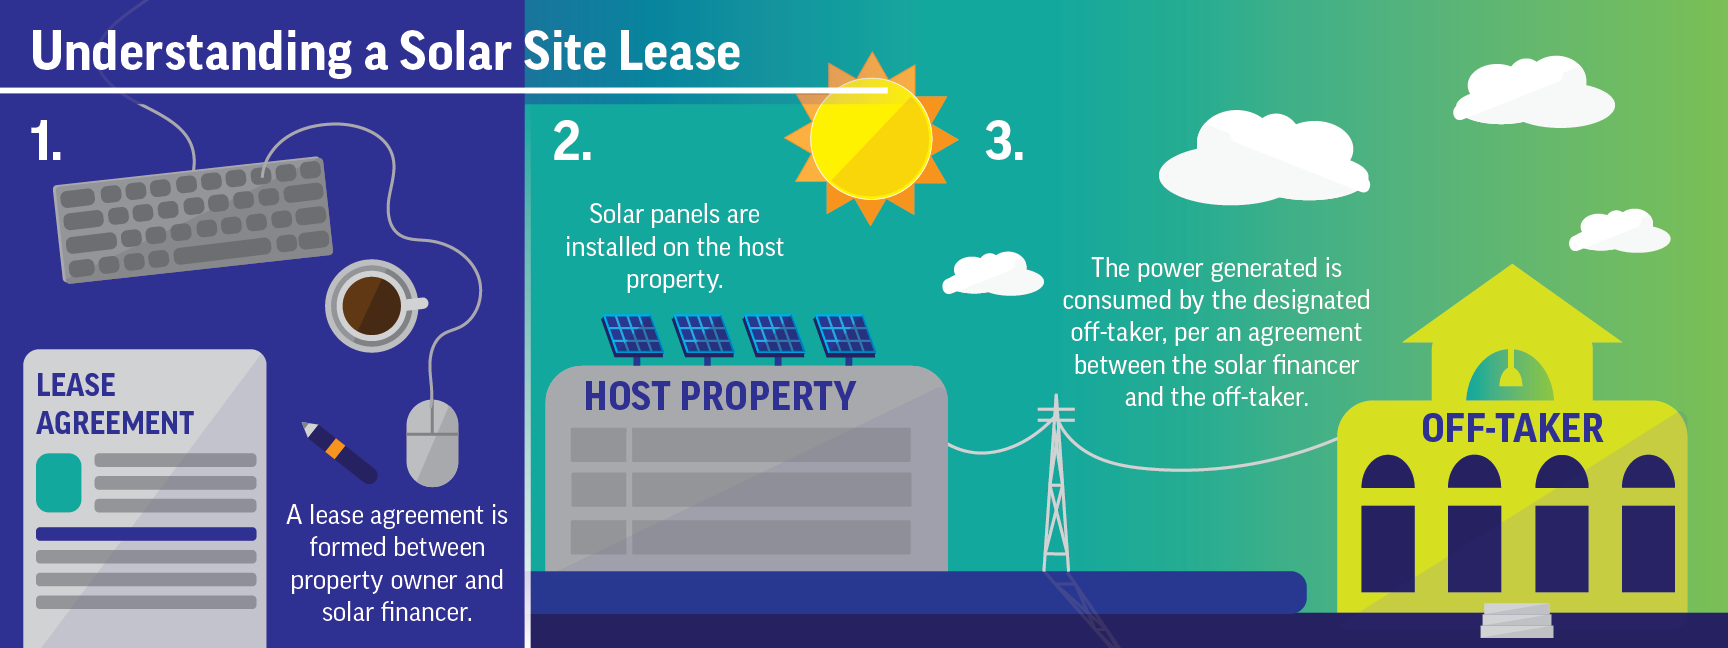 Site-Lease-Infographic